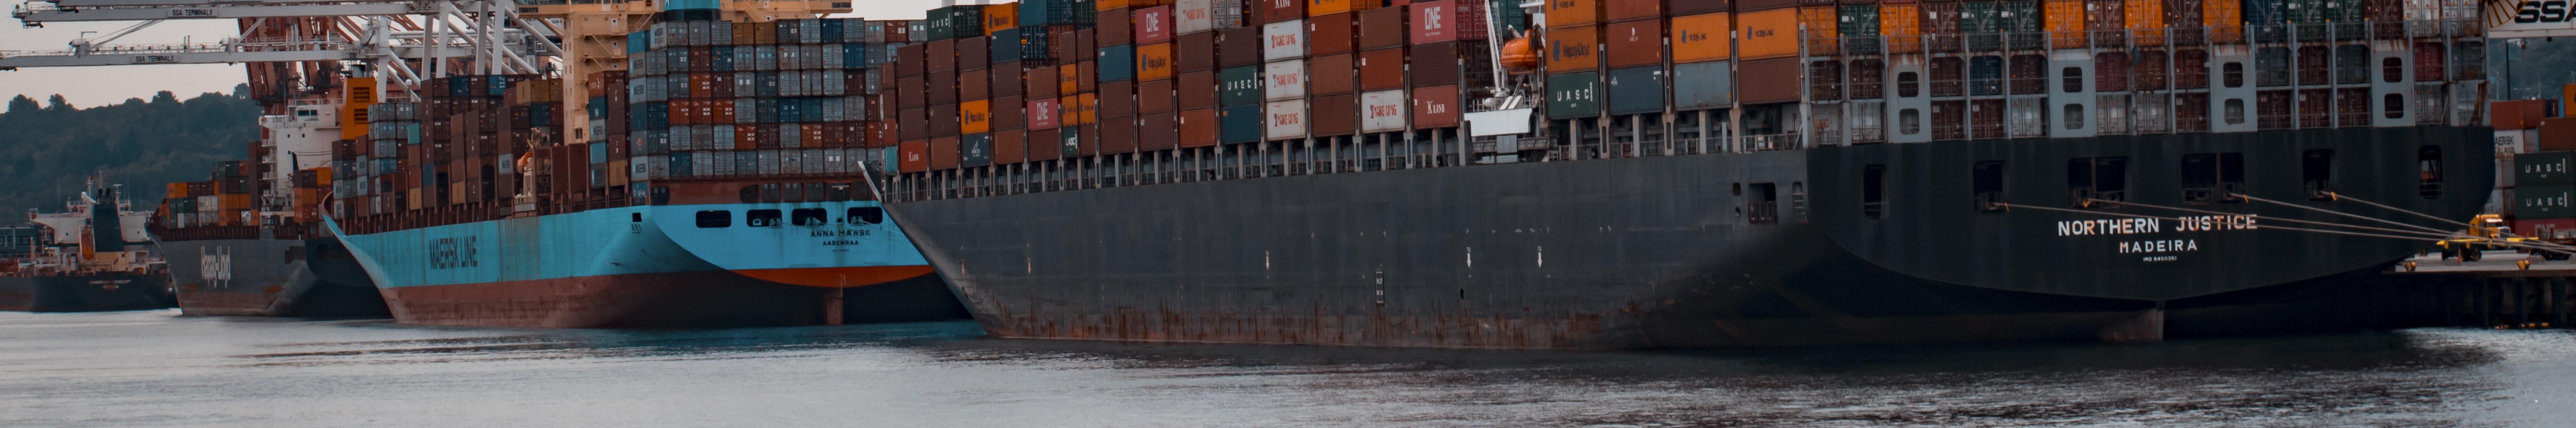 Hutchison port lacks transparency, by disclosing the waste of 2 ports from a total of 52